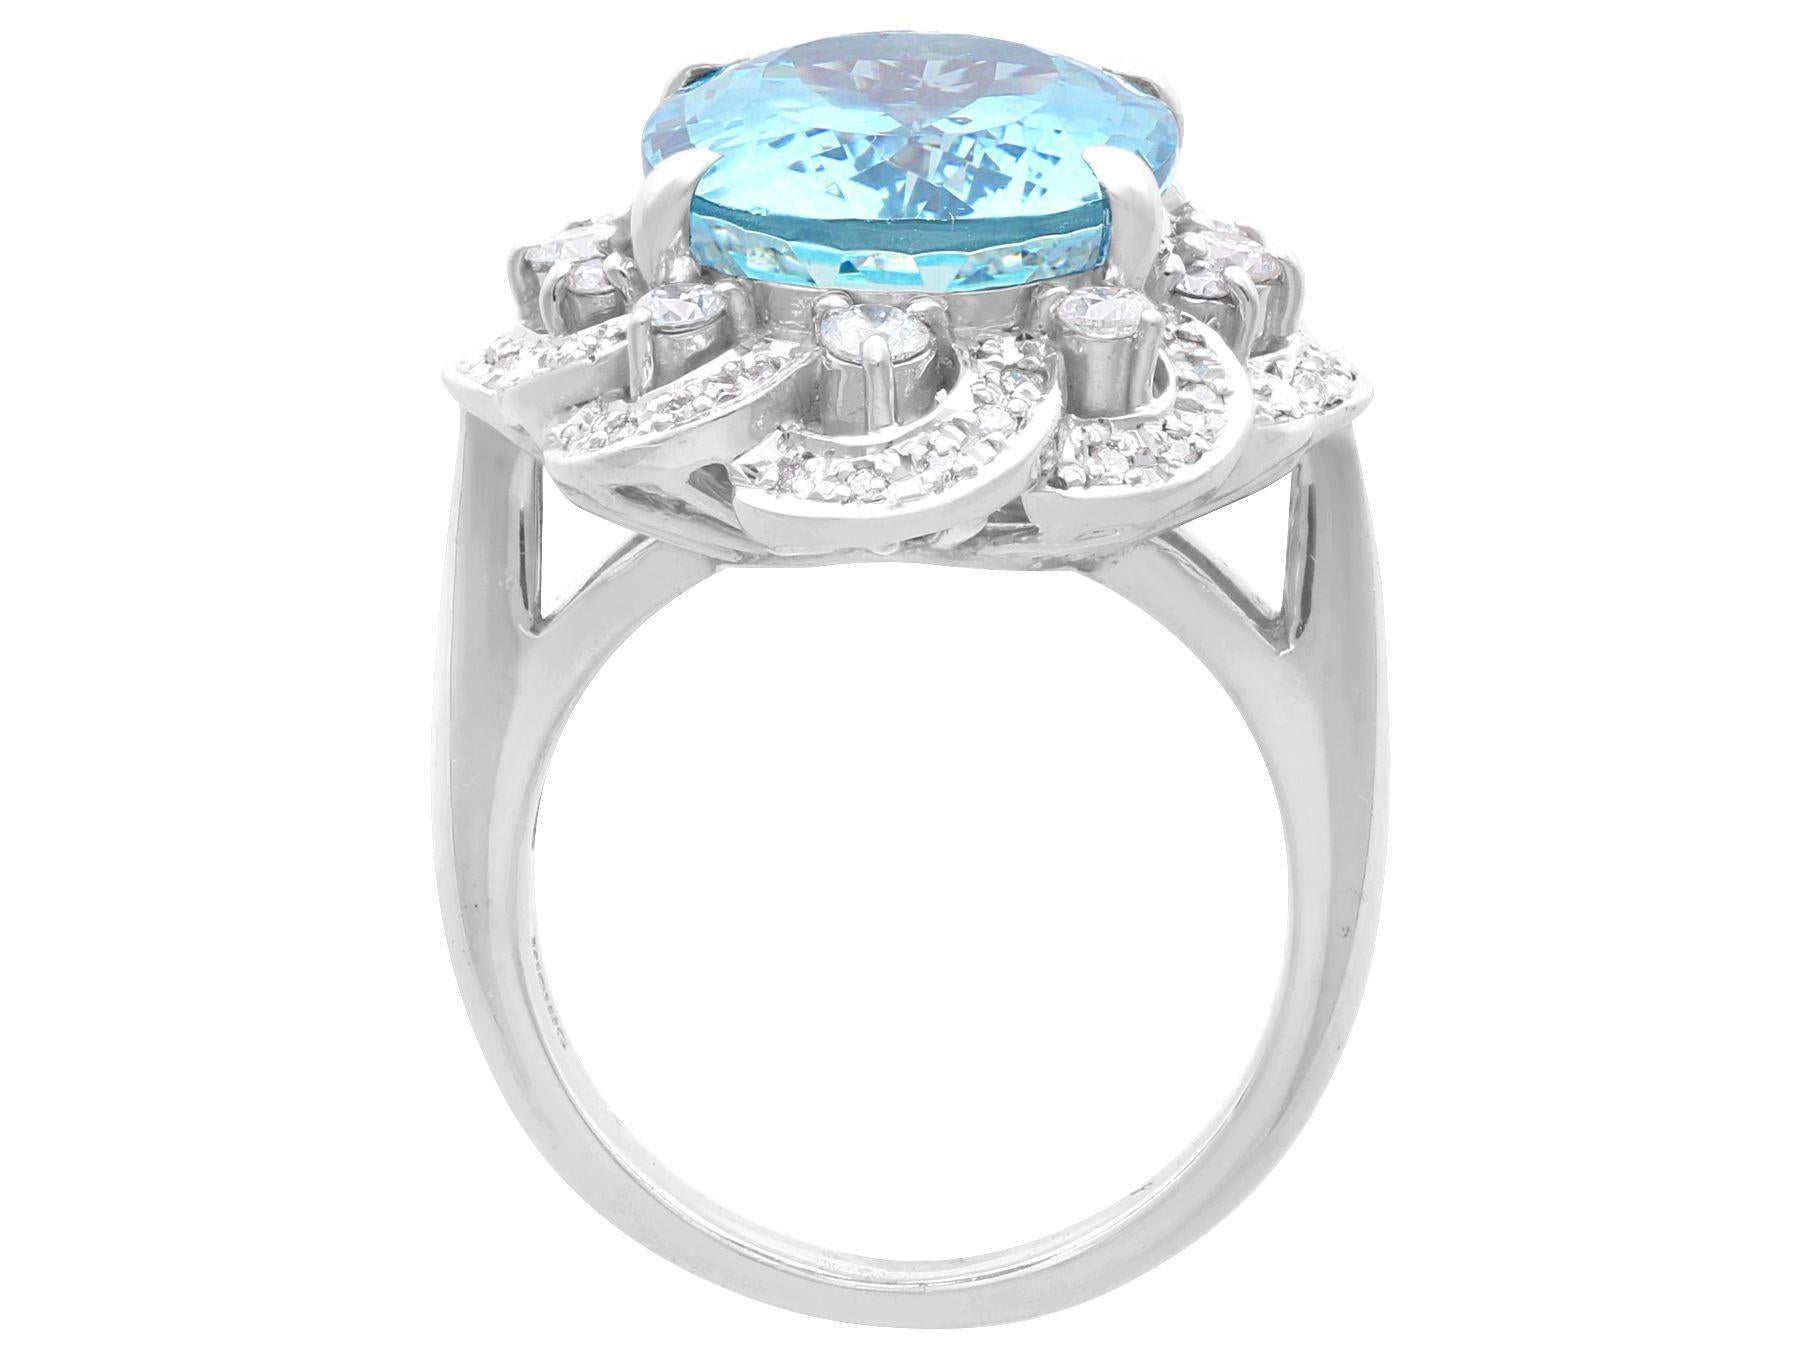 9.26 Carat Aquamarine and Diamond 18k White Gold Dress Ring In Excellent Condition For Sale In Jesmond, Newcastle Upon Tyne